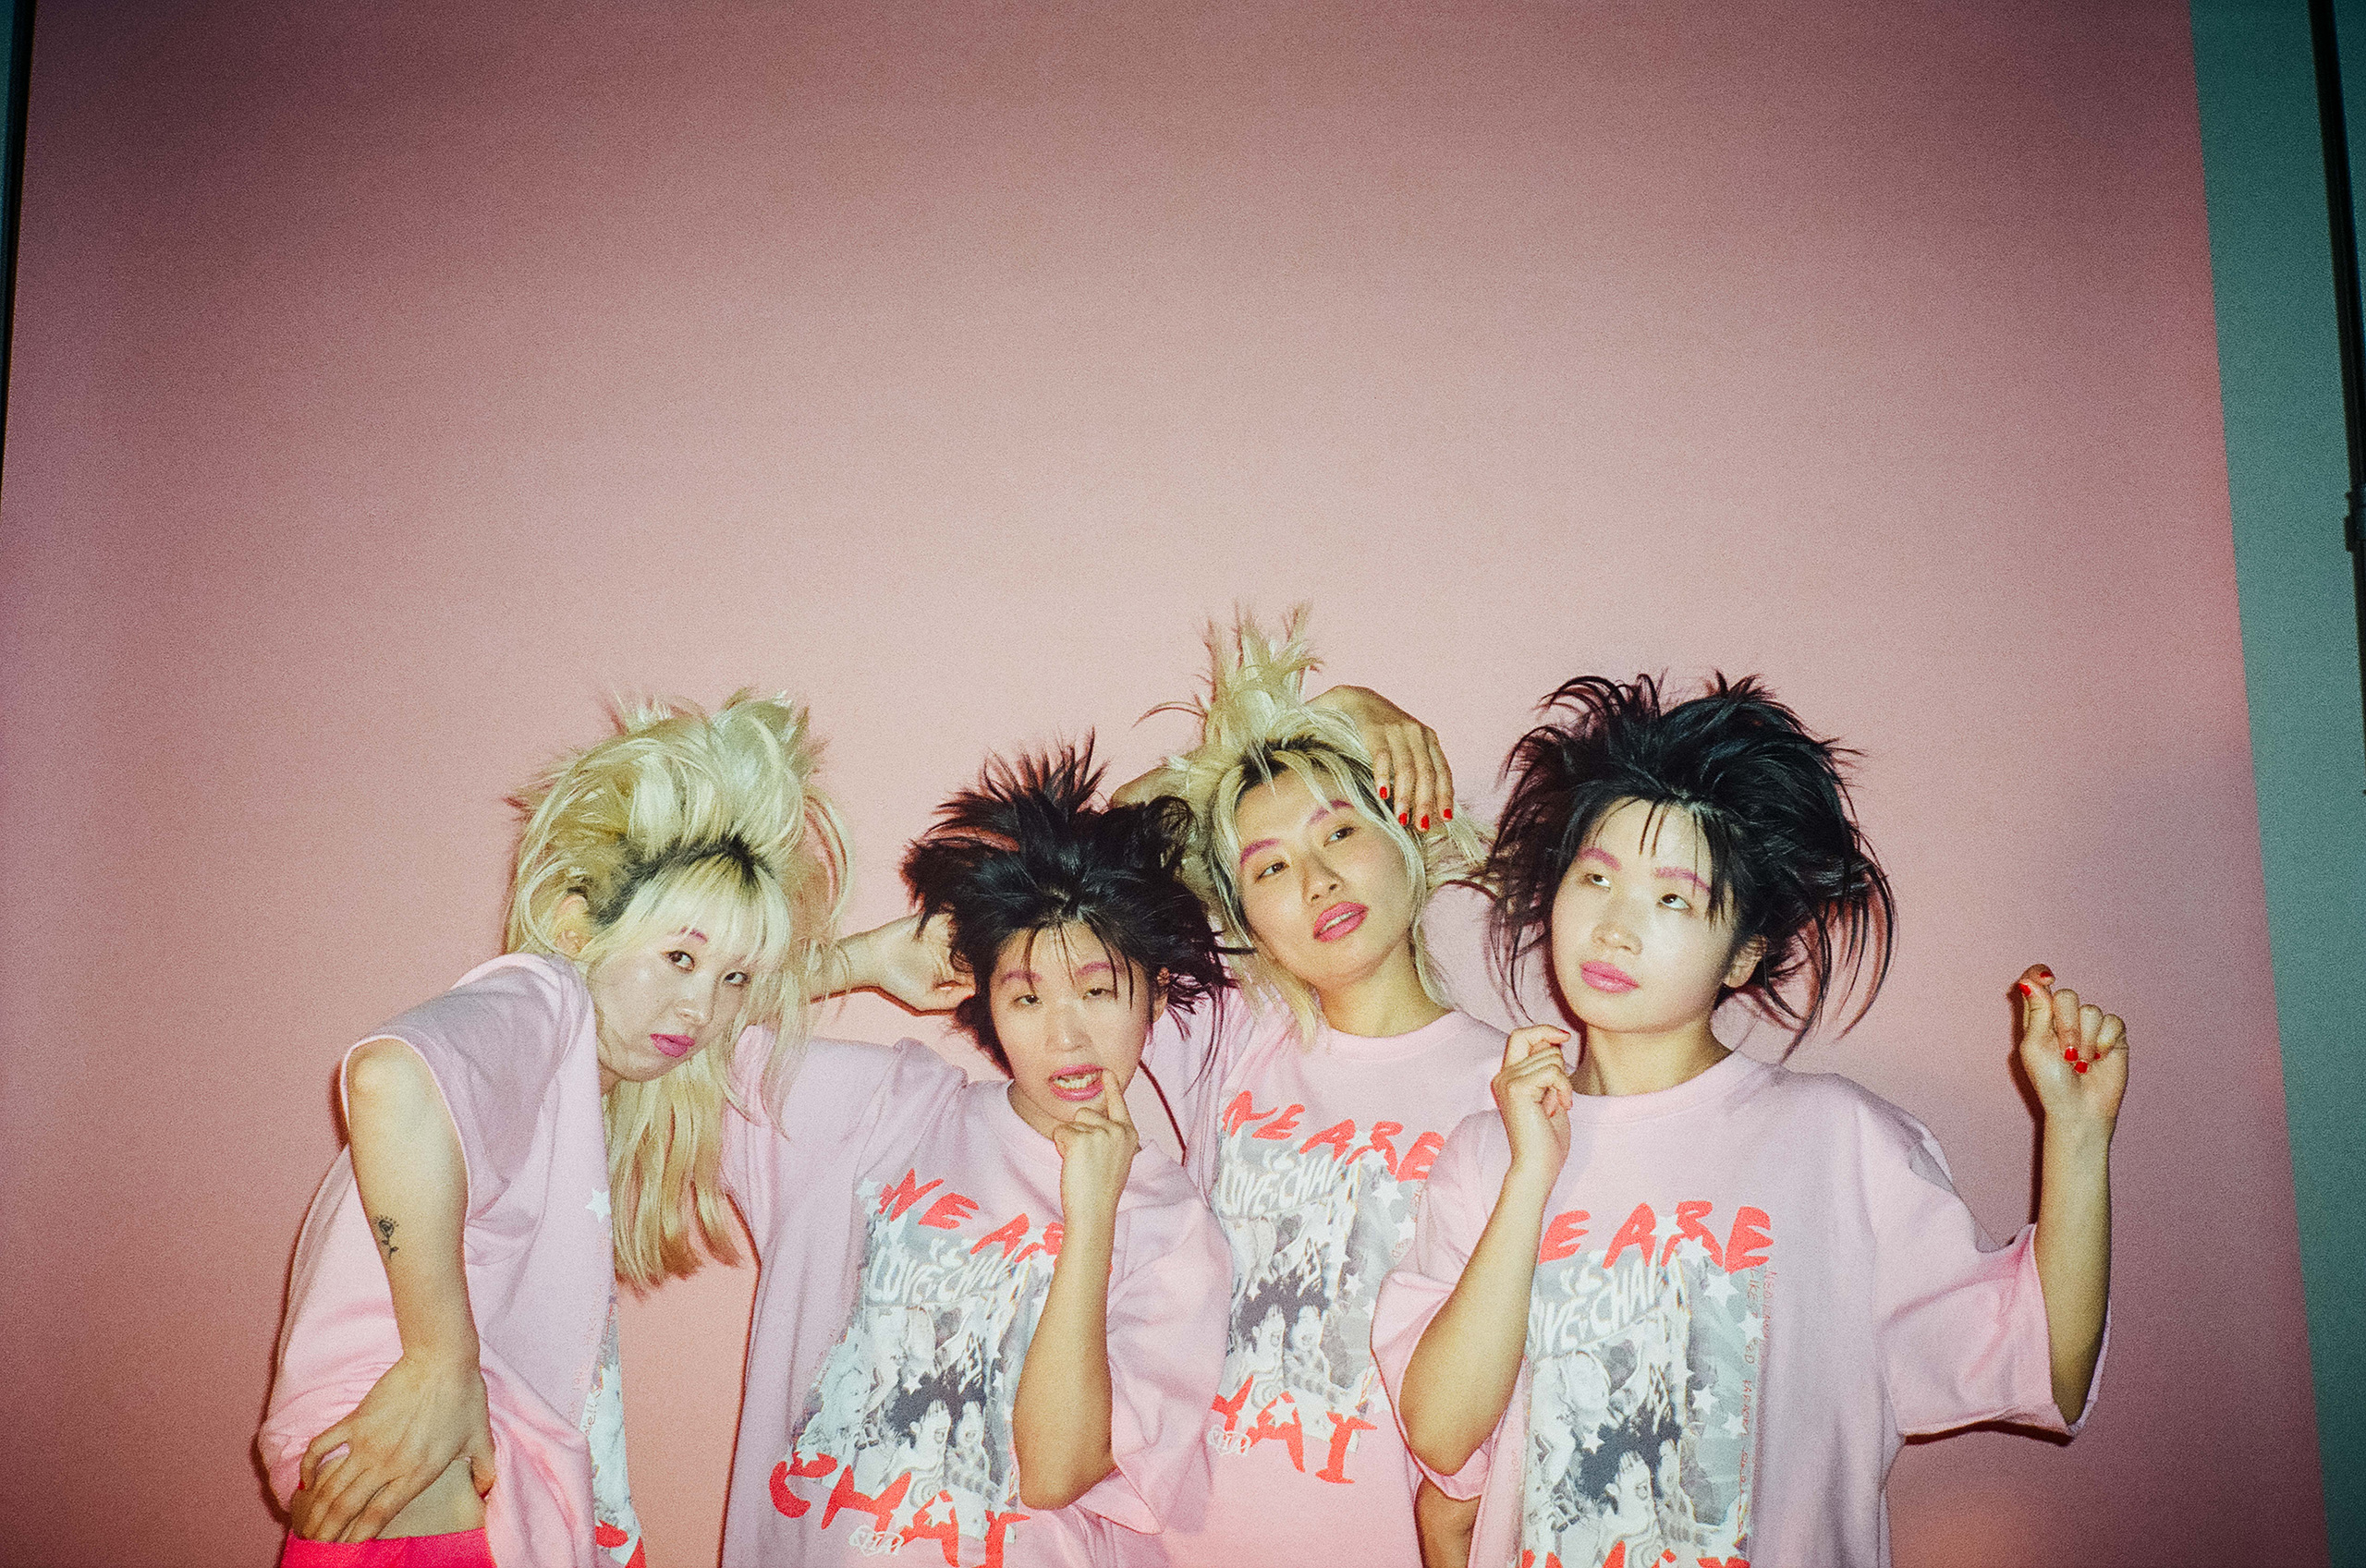 The 4 members of CHAI stood side by side against a pale pink backdrop